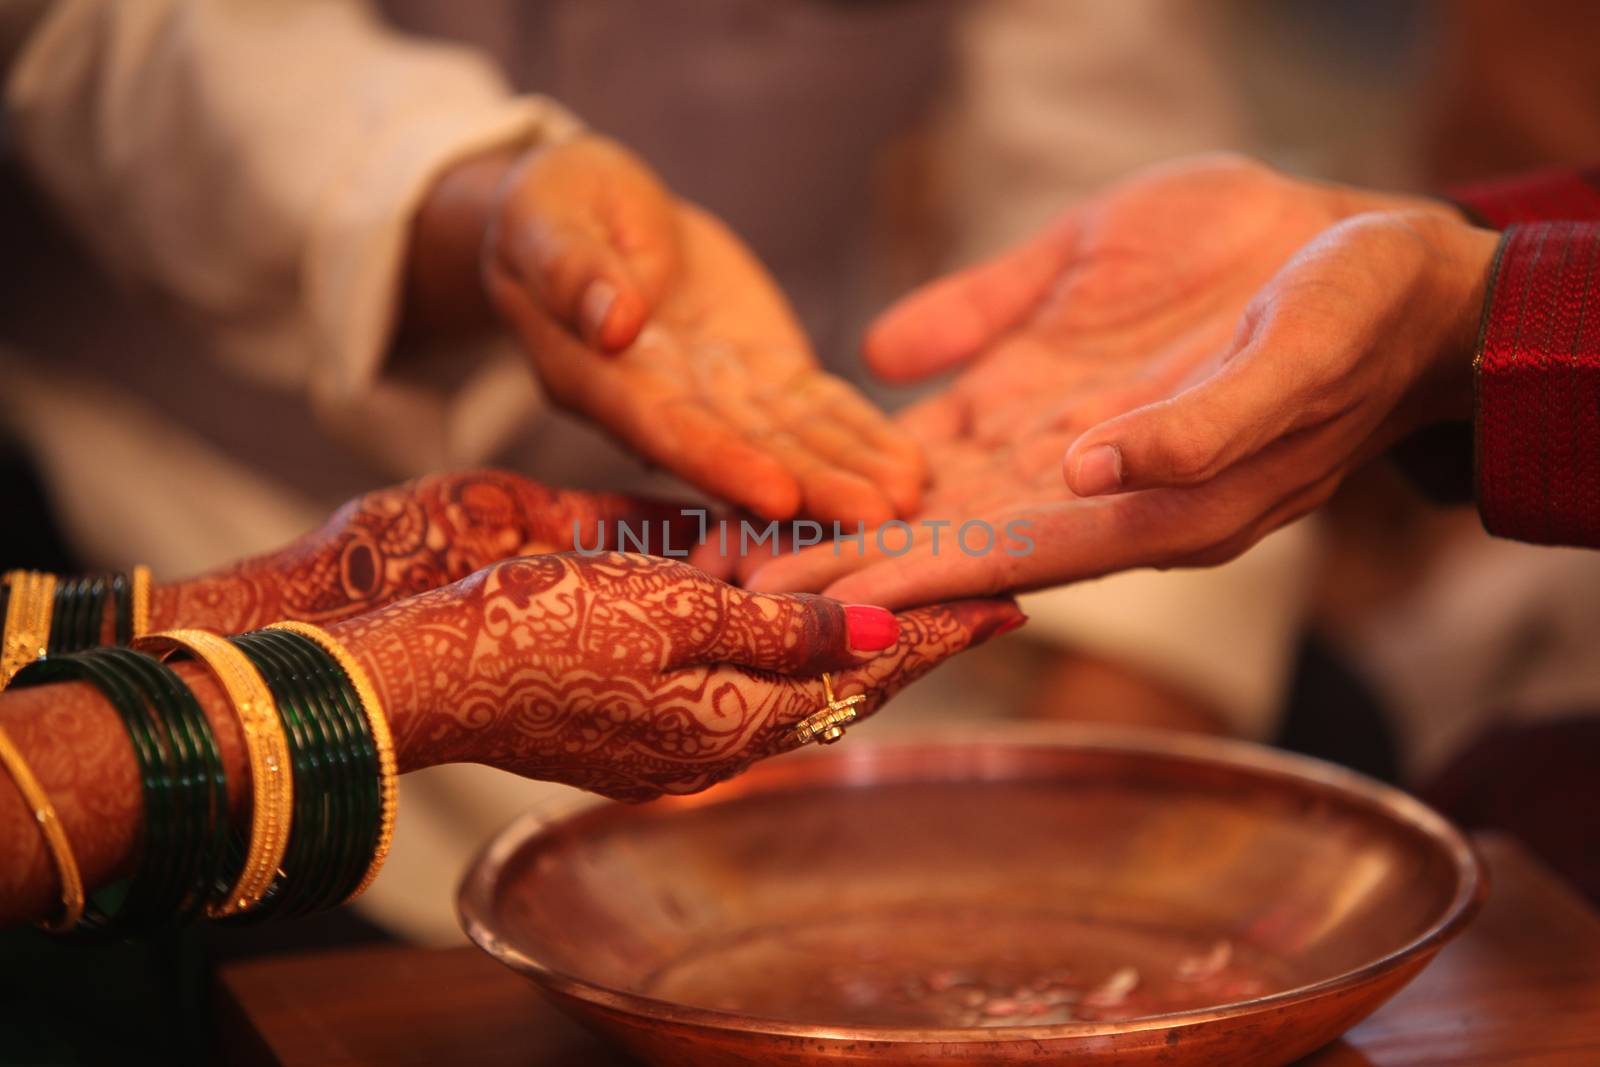 The hands of the bride and groom in a traditional Hindu wedding ritual